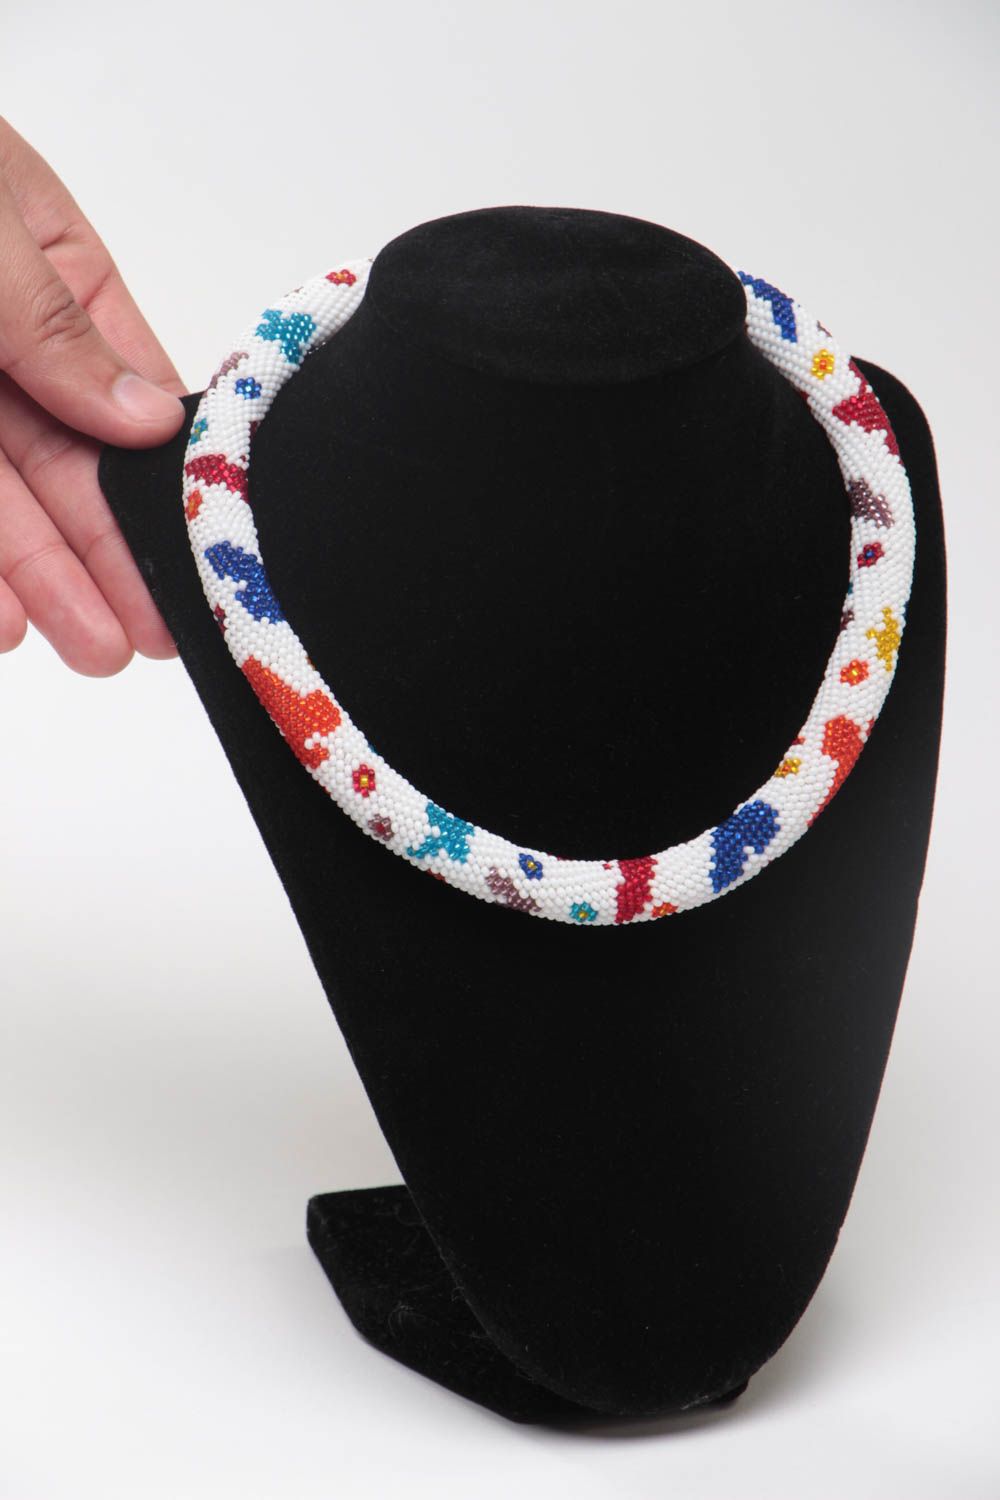 Handmade designer white beaded cord necklace with colorful floral pattern photo 5